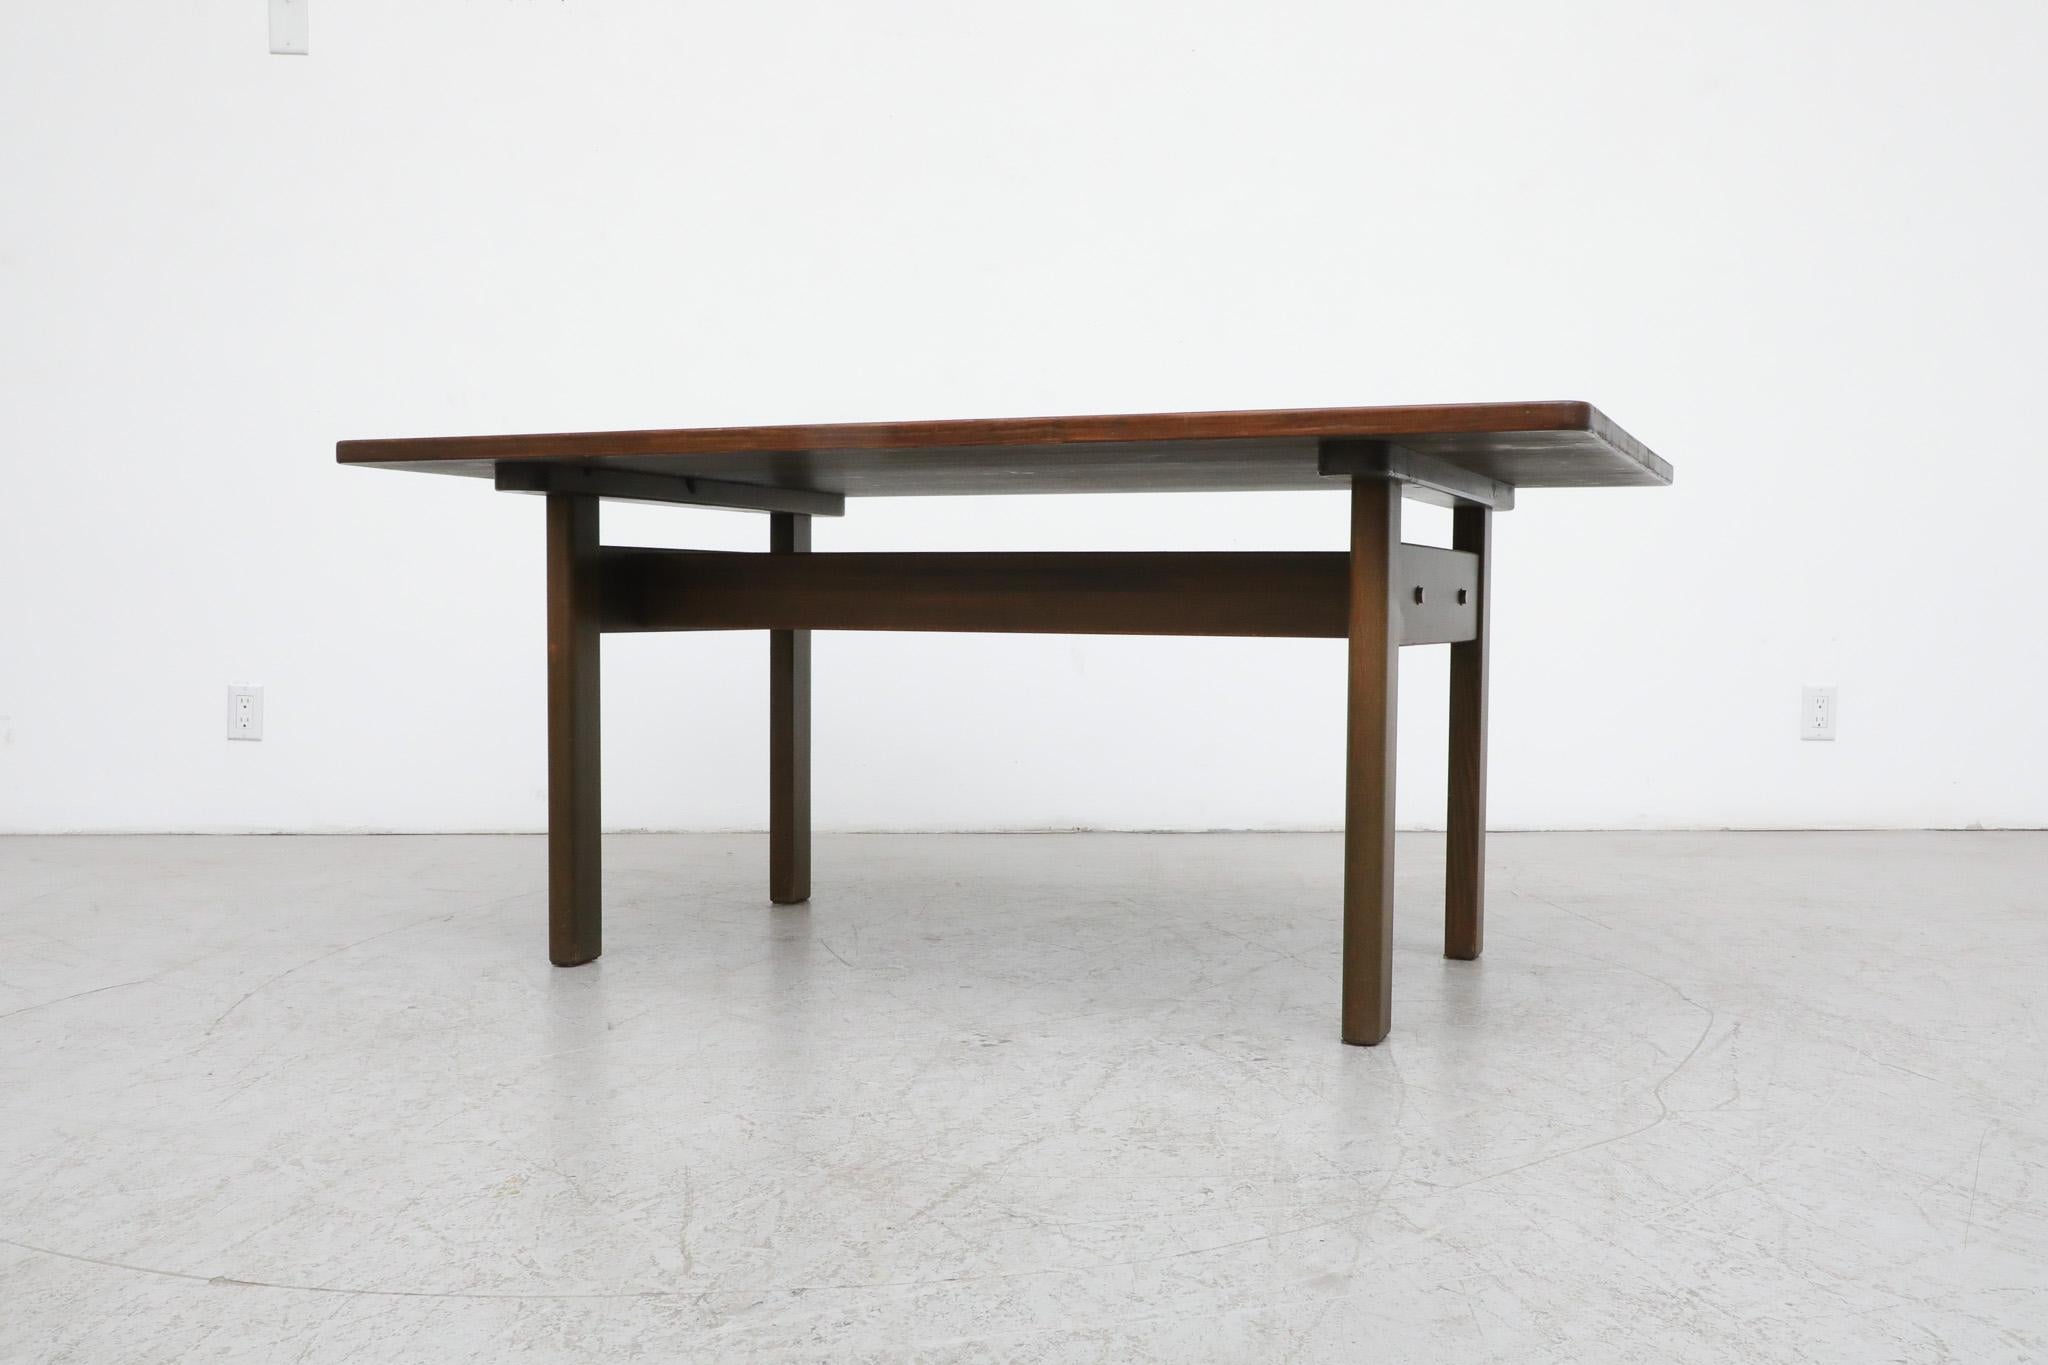 Stained Mid-Century, green stained 'Asserbo' dining table by Børge Mogensen